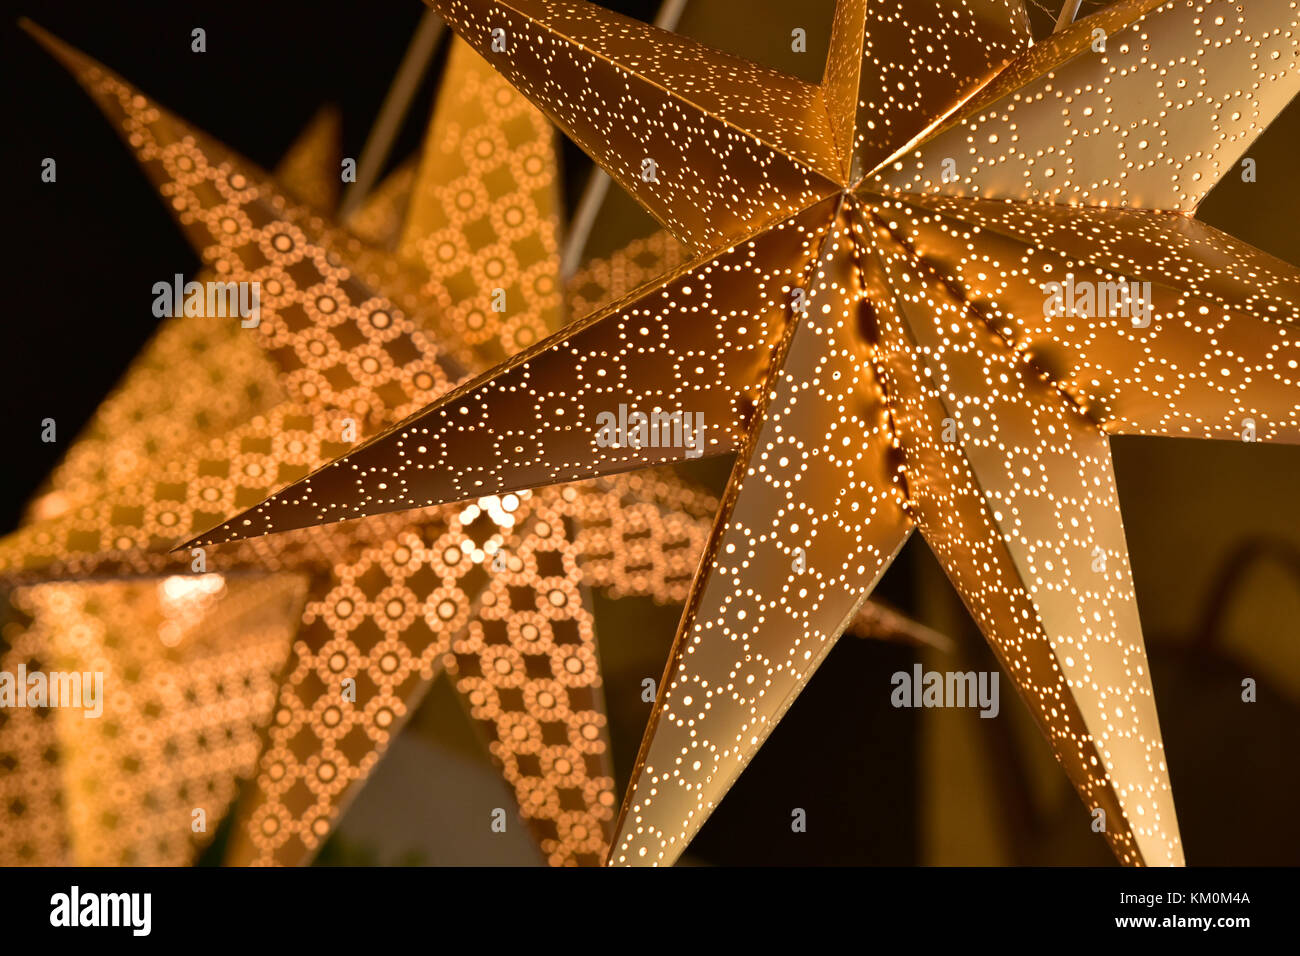 Golden coloured christmas star decorations illuminated to celebrate the festive season. Astral designs and glittery style of decor for xmas. Shining. Stock Photo